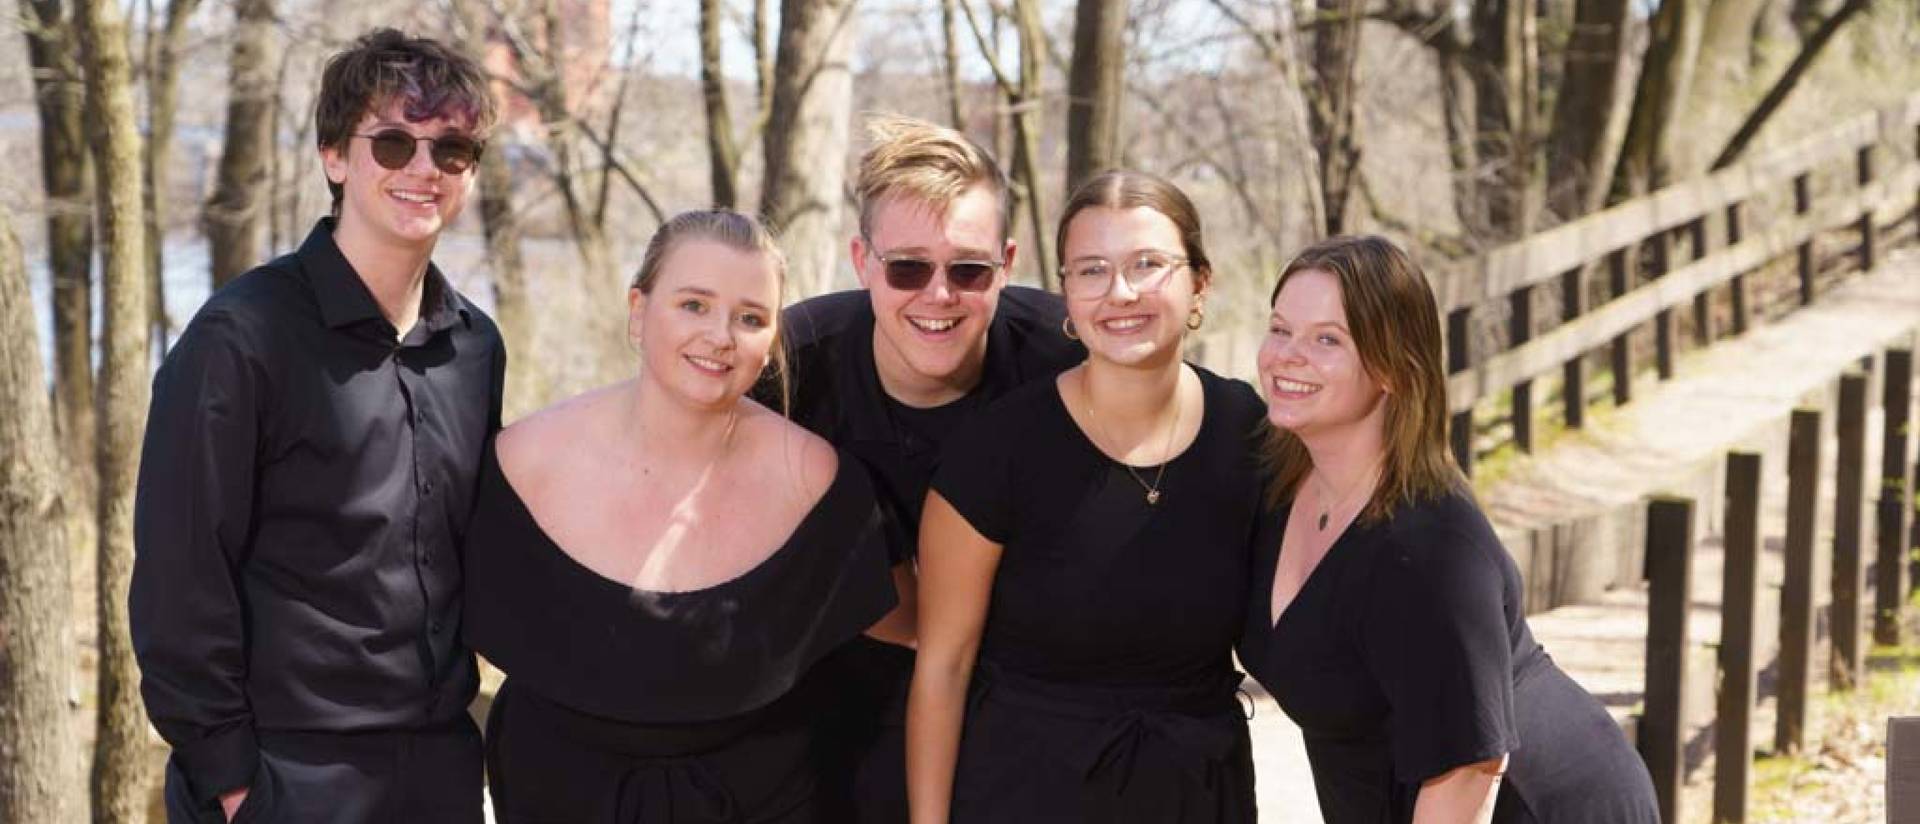 A small group of chamber ensemble members wearing all black pose for a photo outside